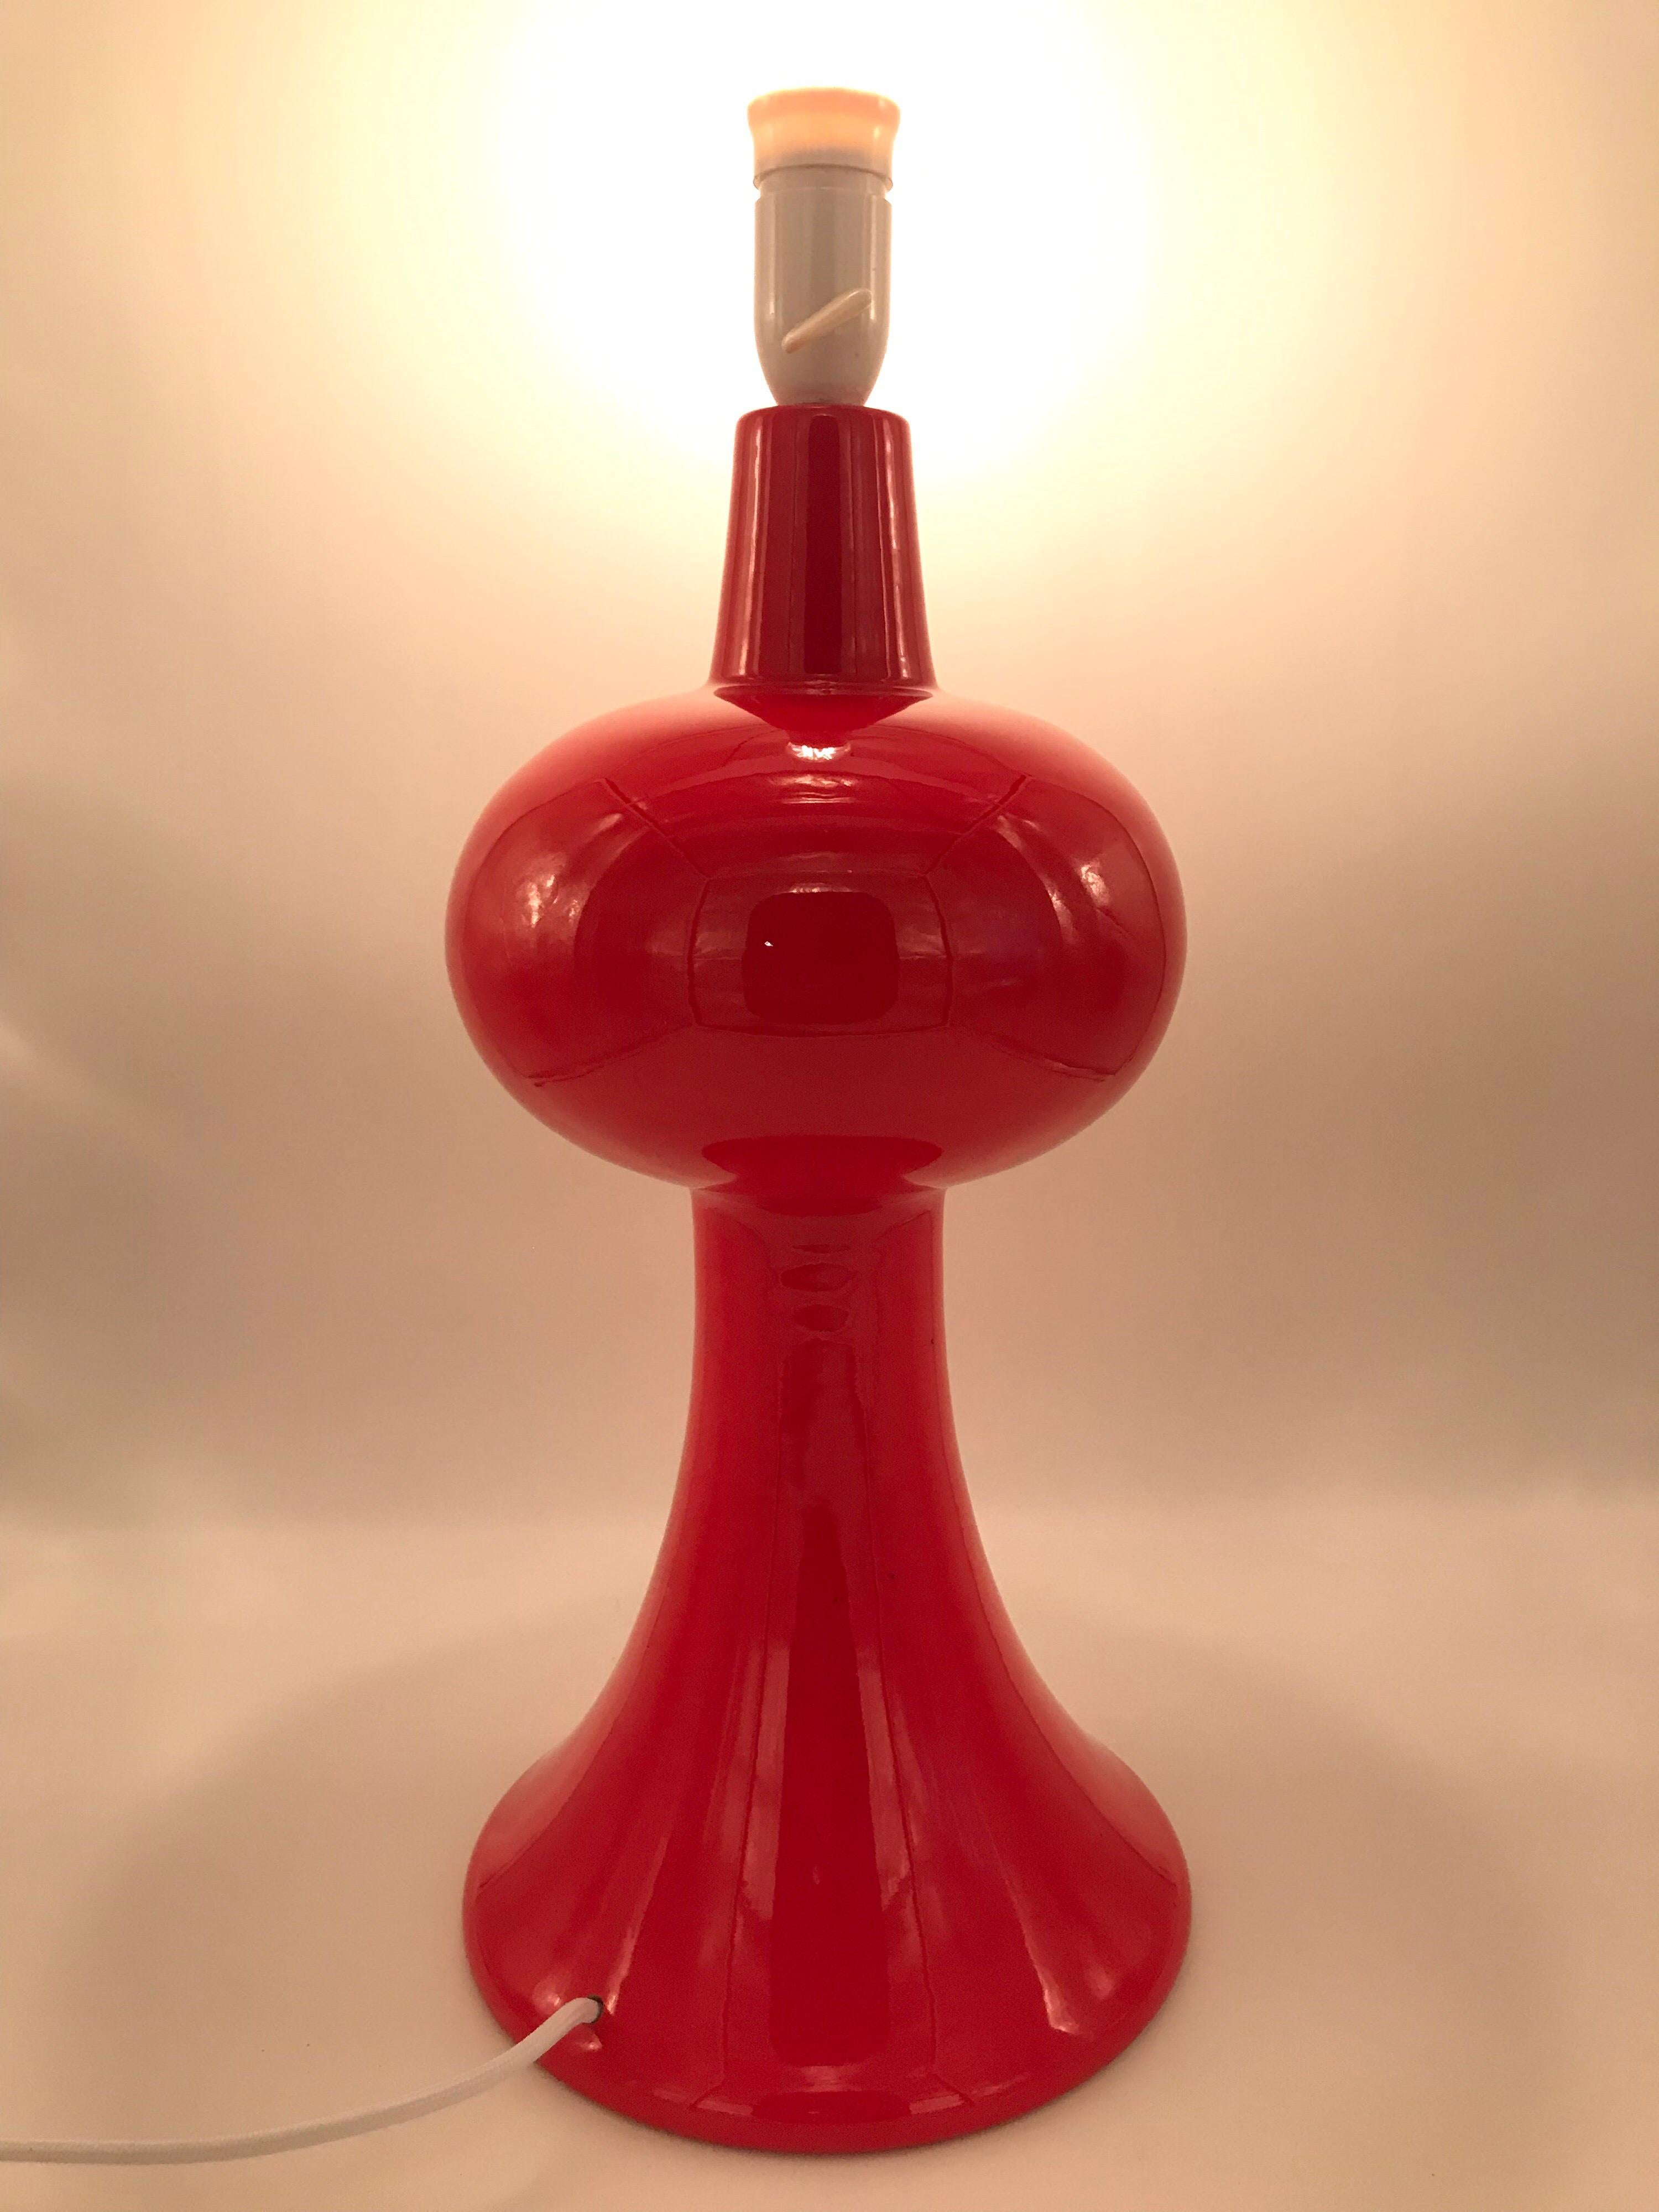 Hand-Crafted Vintage Retro Porcelain Table Lamp from the 1960s